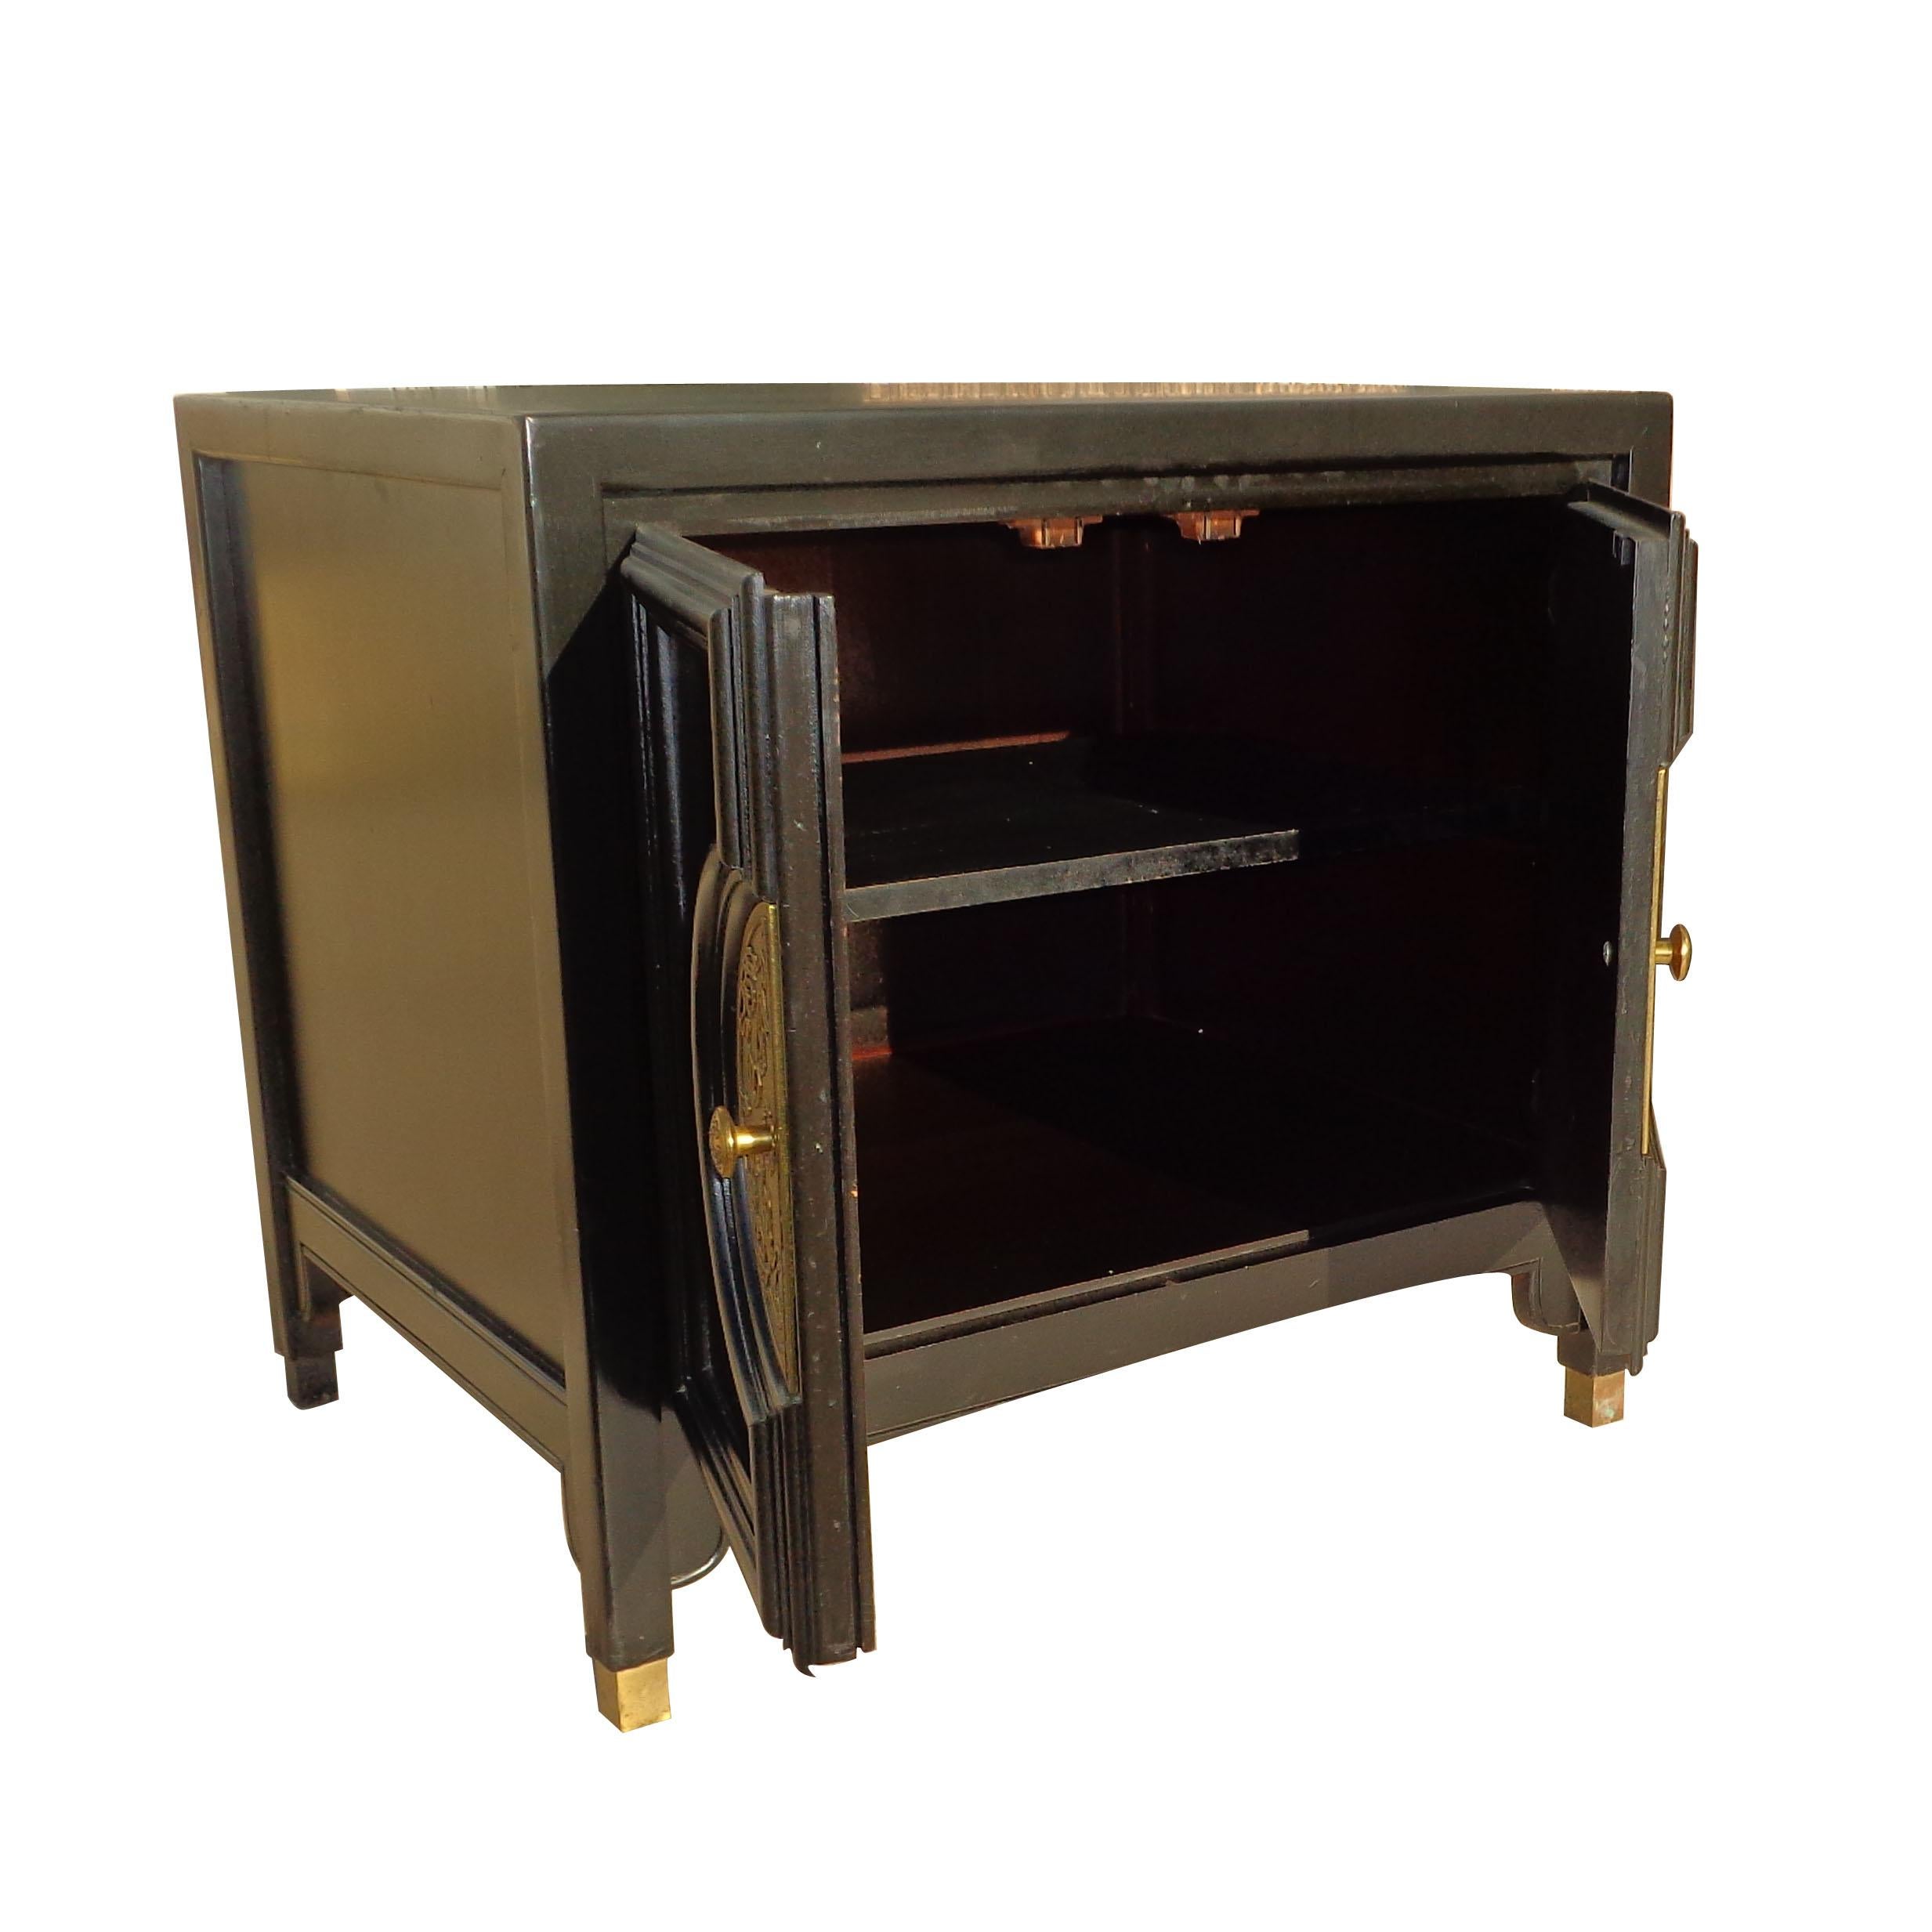 Pair of Century Furniture Chin Hua nightstands

Pair of Century Furniture Chin Hua nightstands

Pair of Chin Hua nightstands by Century Furniture. Ebonized cases with brass hardware and brass-tipped feet. 
Open cabinet space with shelf. Stamped